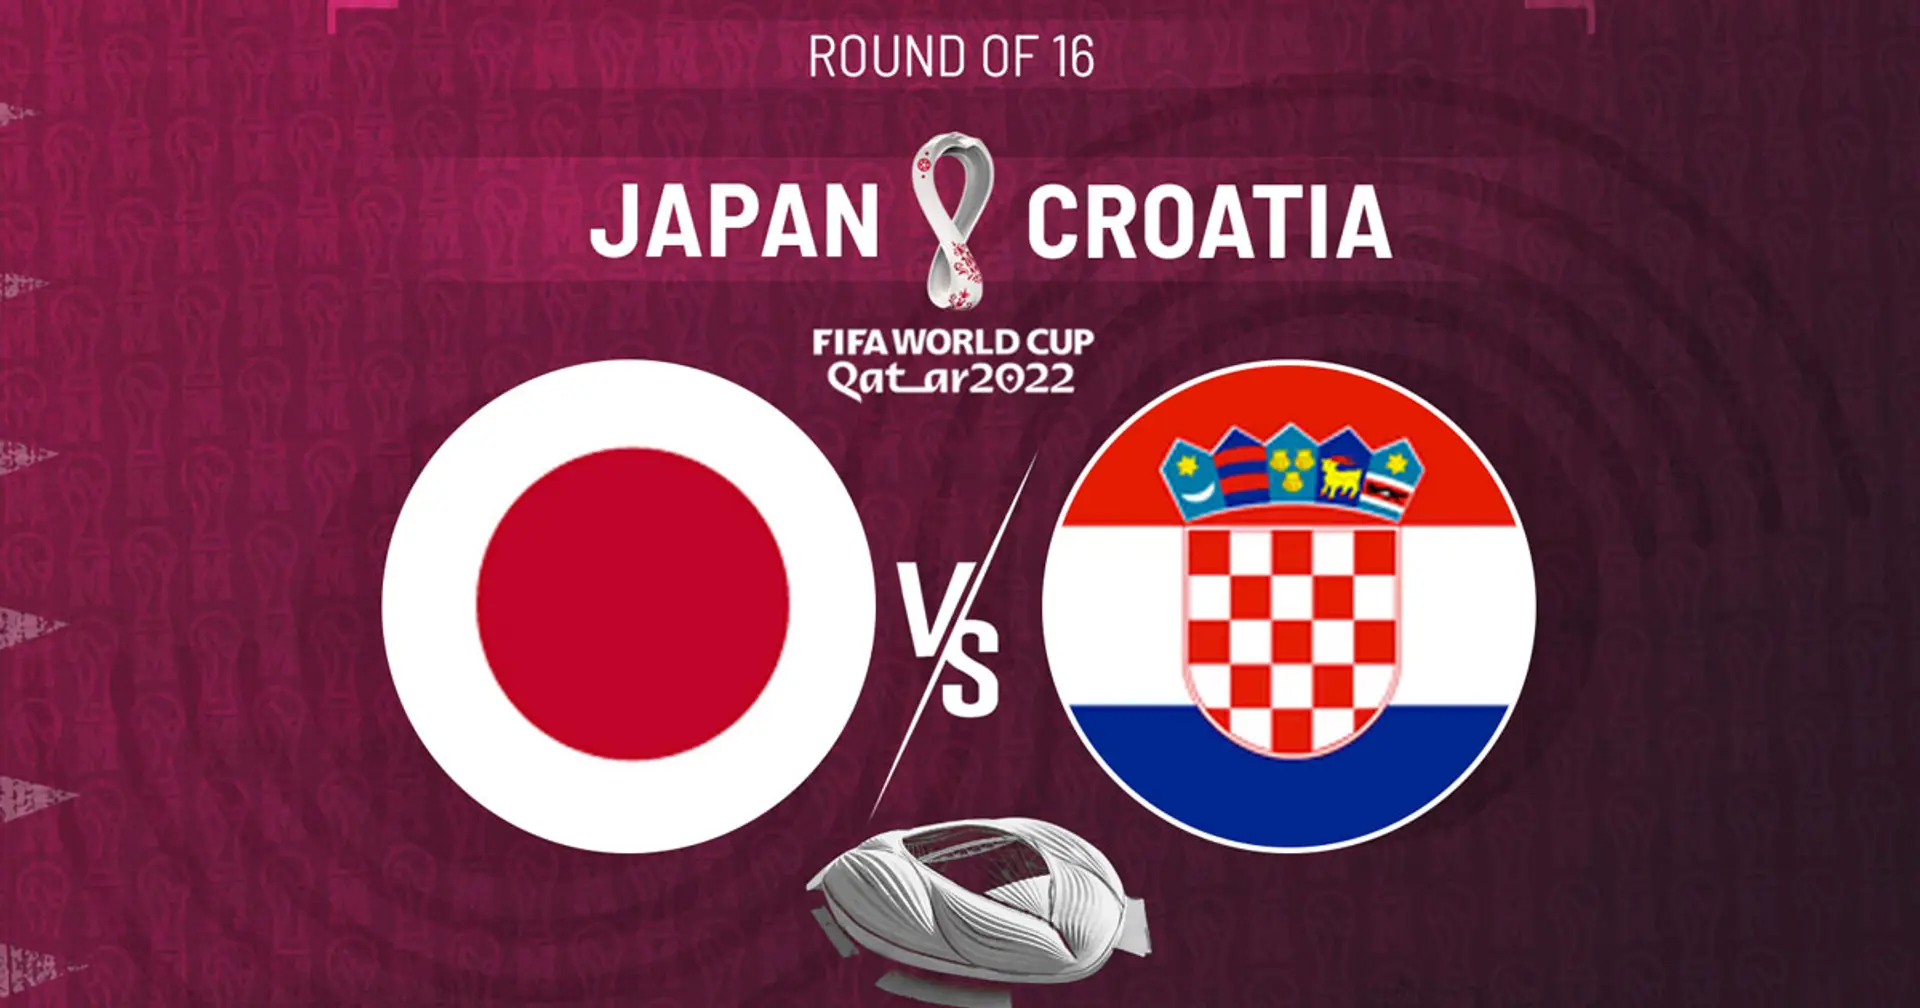 Japan v Croatia: Official team lineups for the World Cup clash revealed